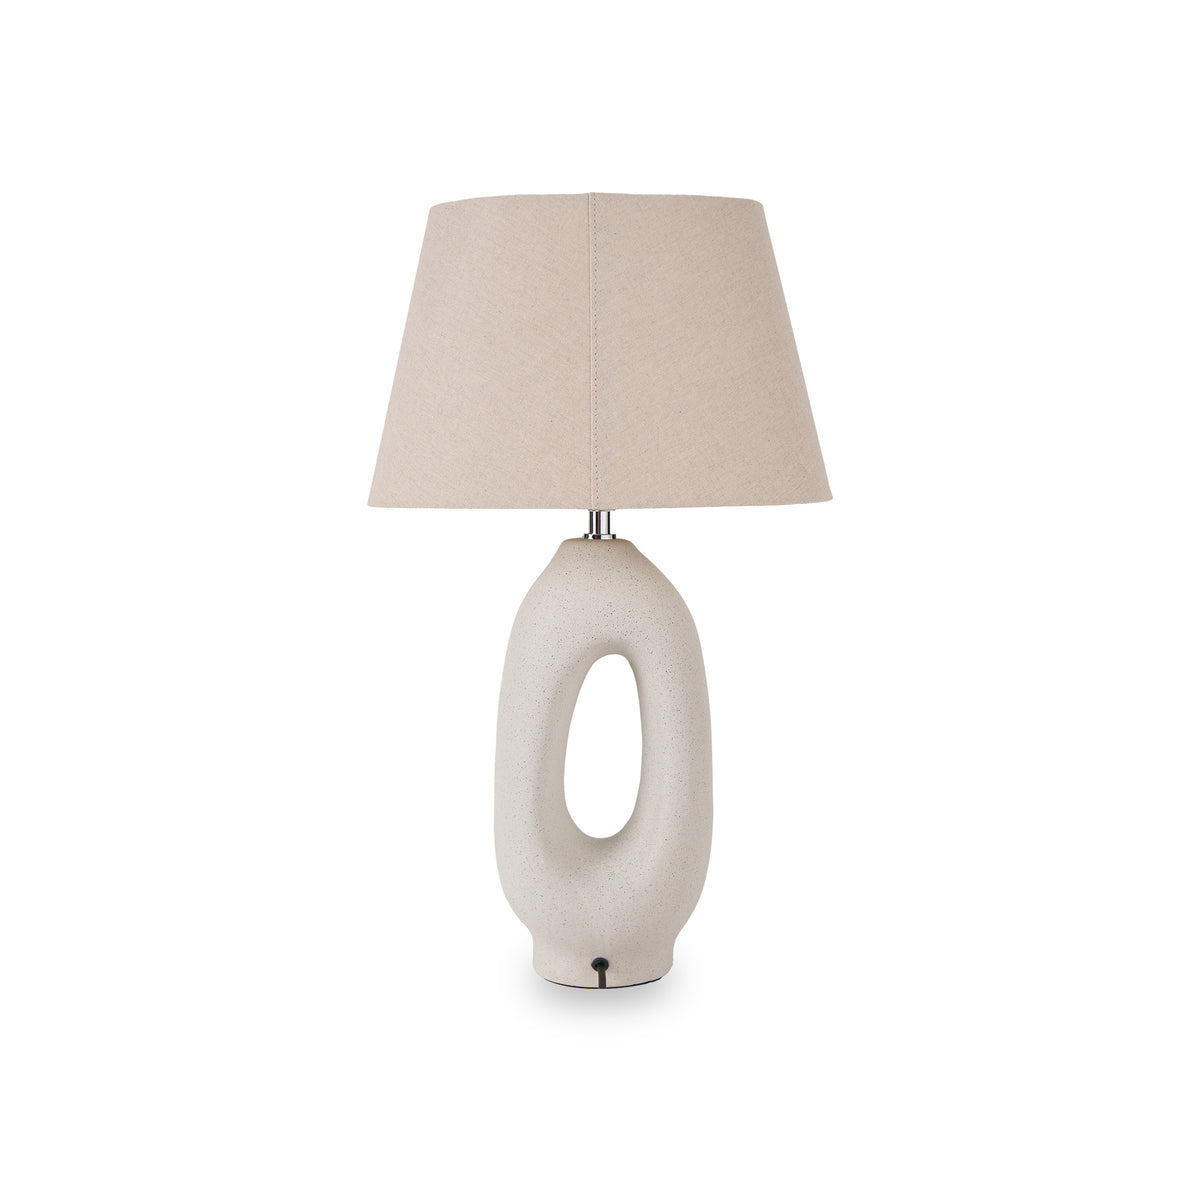 Laila Natural Organic Tall Ceramic Table Lamp from Roseland Furniture